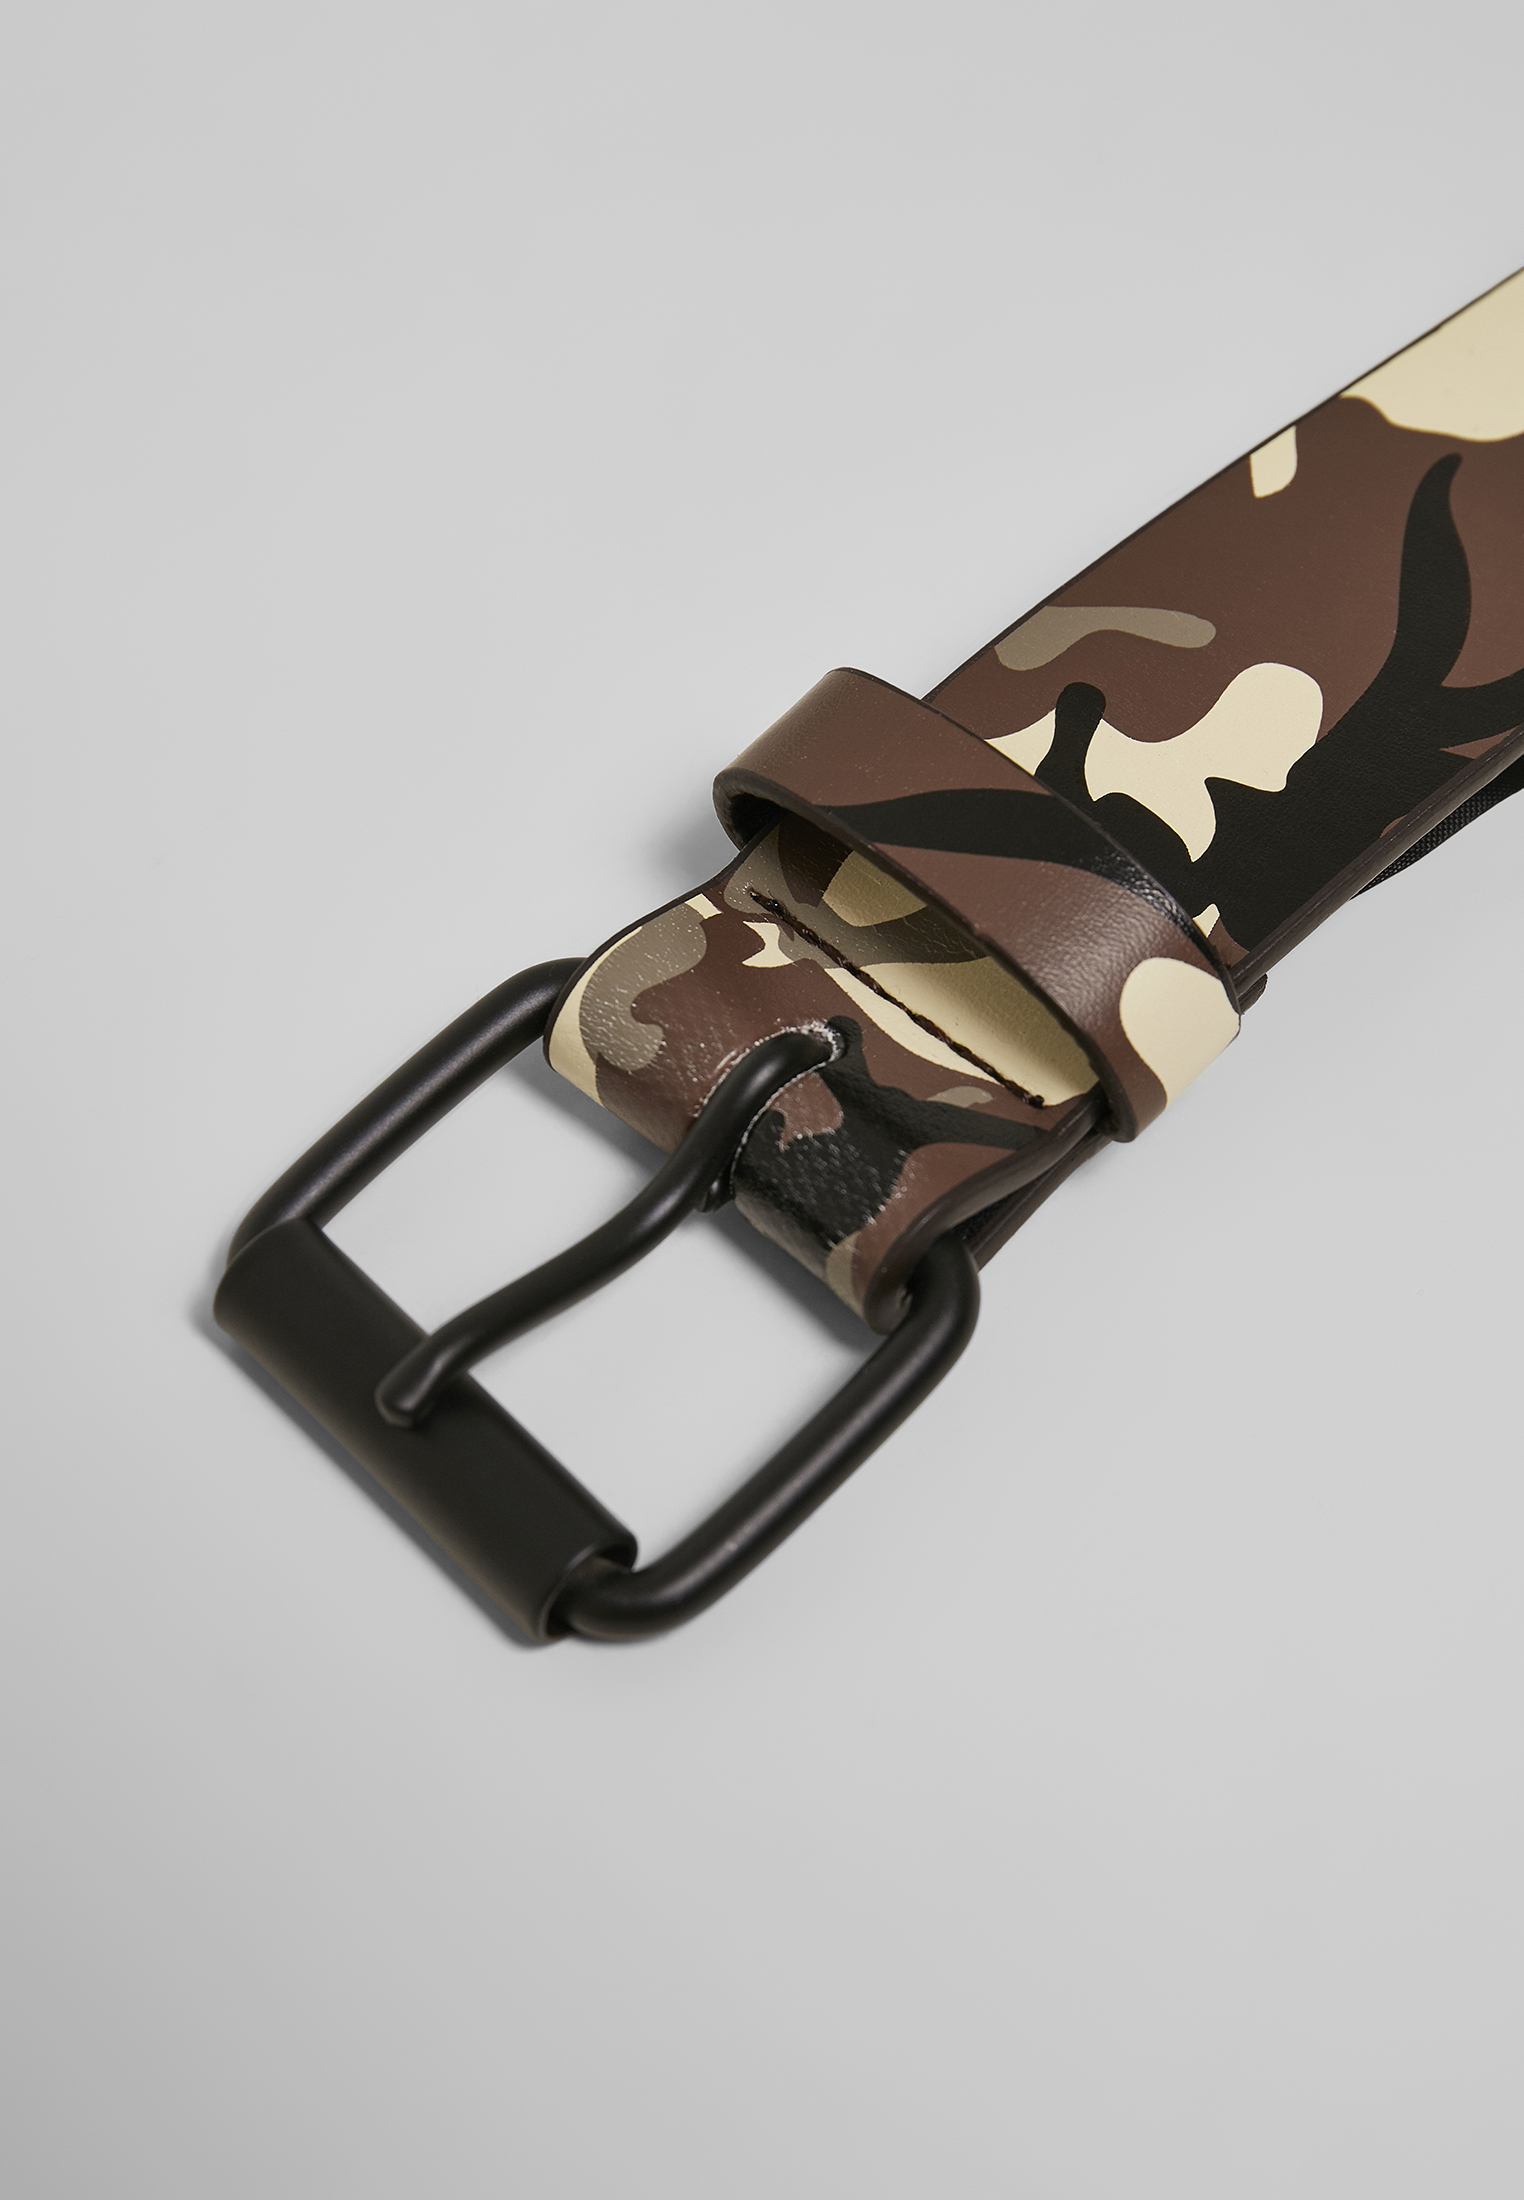 G?rtel Synthetic Leather Camo Belt in Farbe browncamo